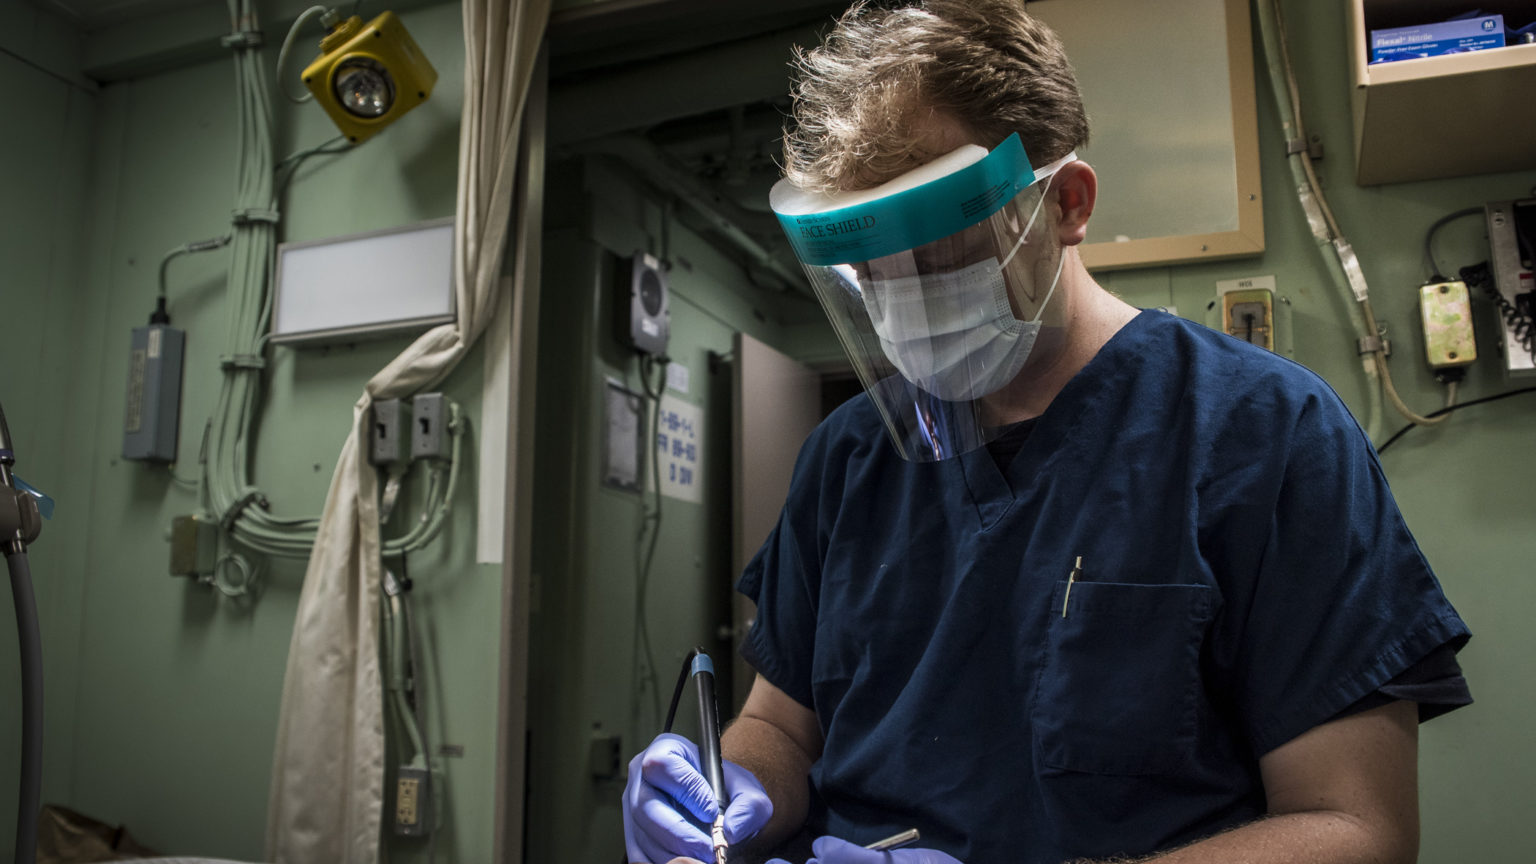 A U.S. Navy officer wears a medical face shield during a teeth cleaning. (Courtesty: U.S. Naval Forces Central Command/U.S. Fifth Fleet)